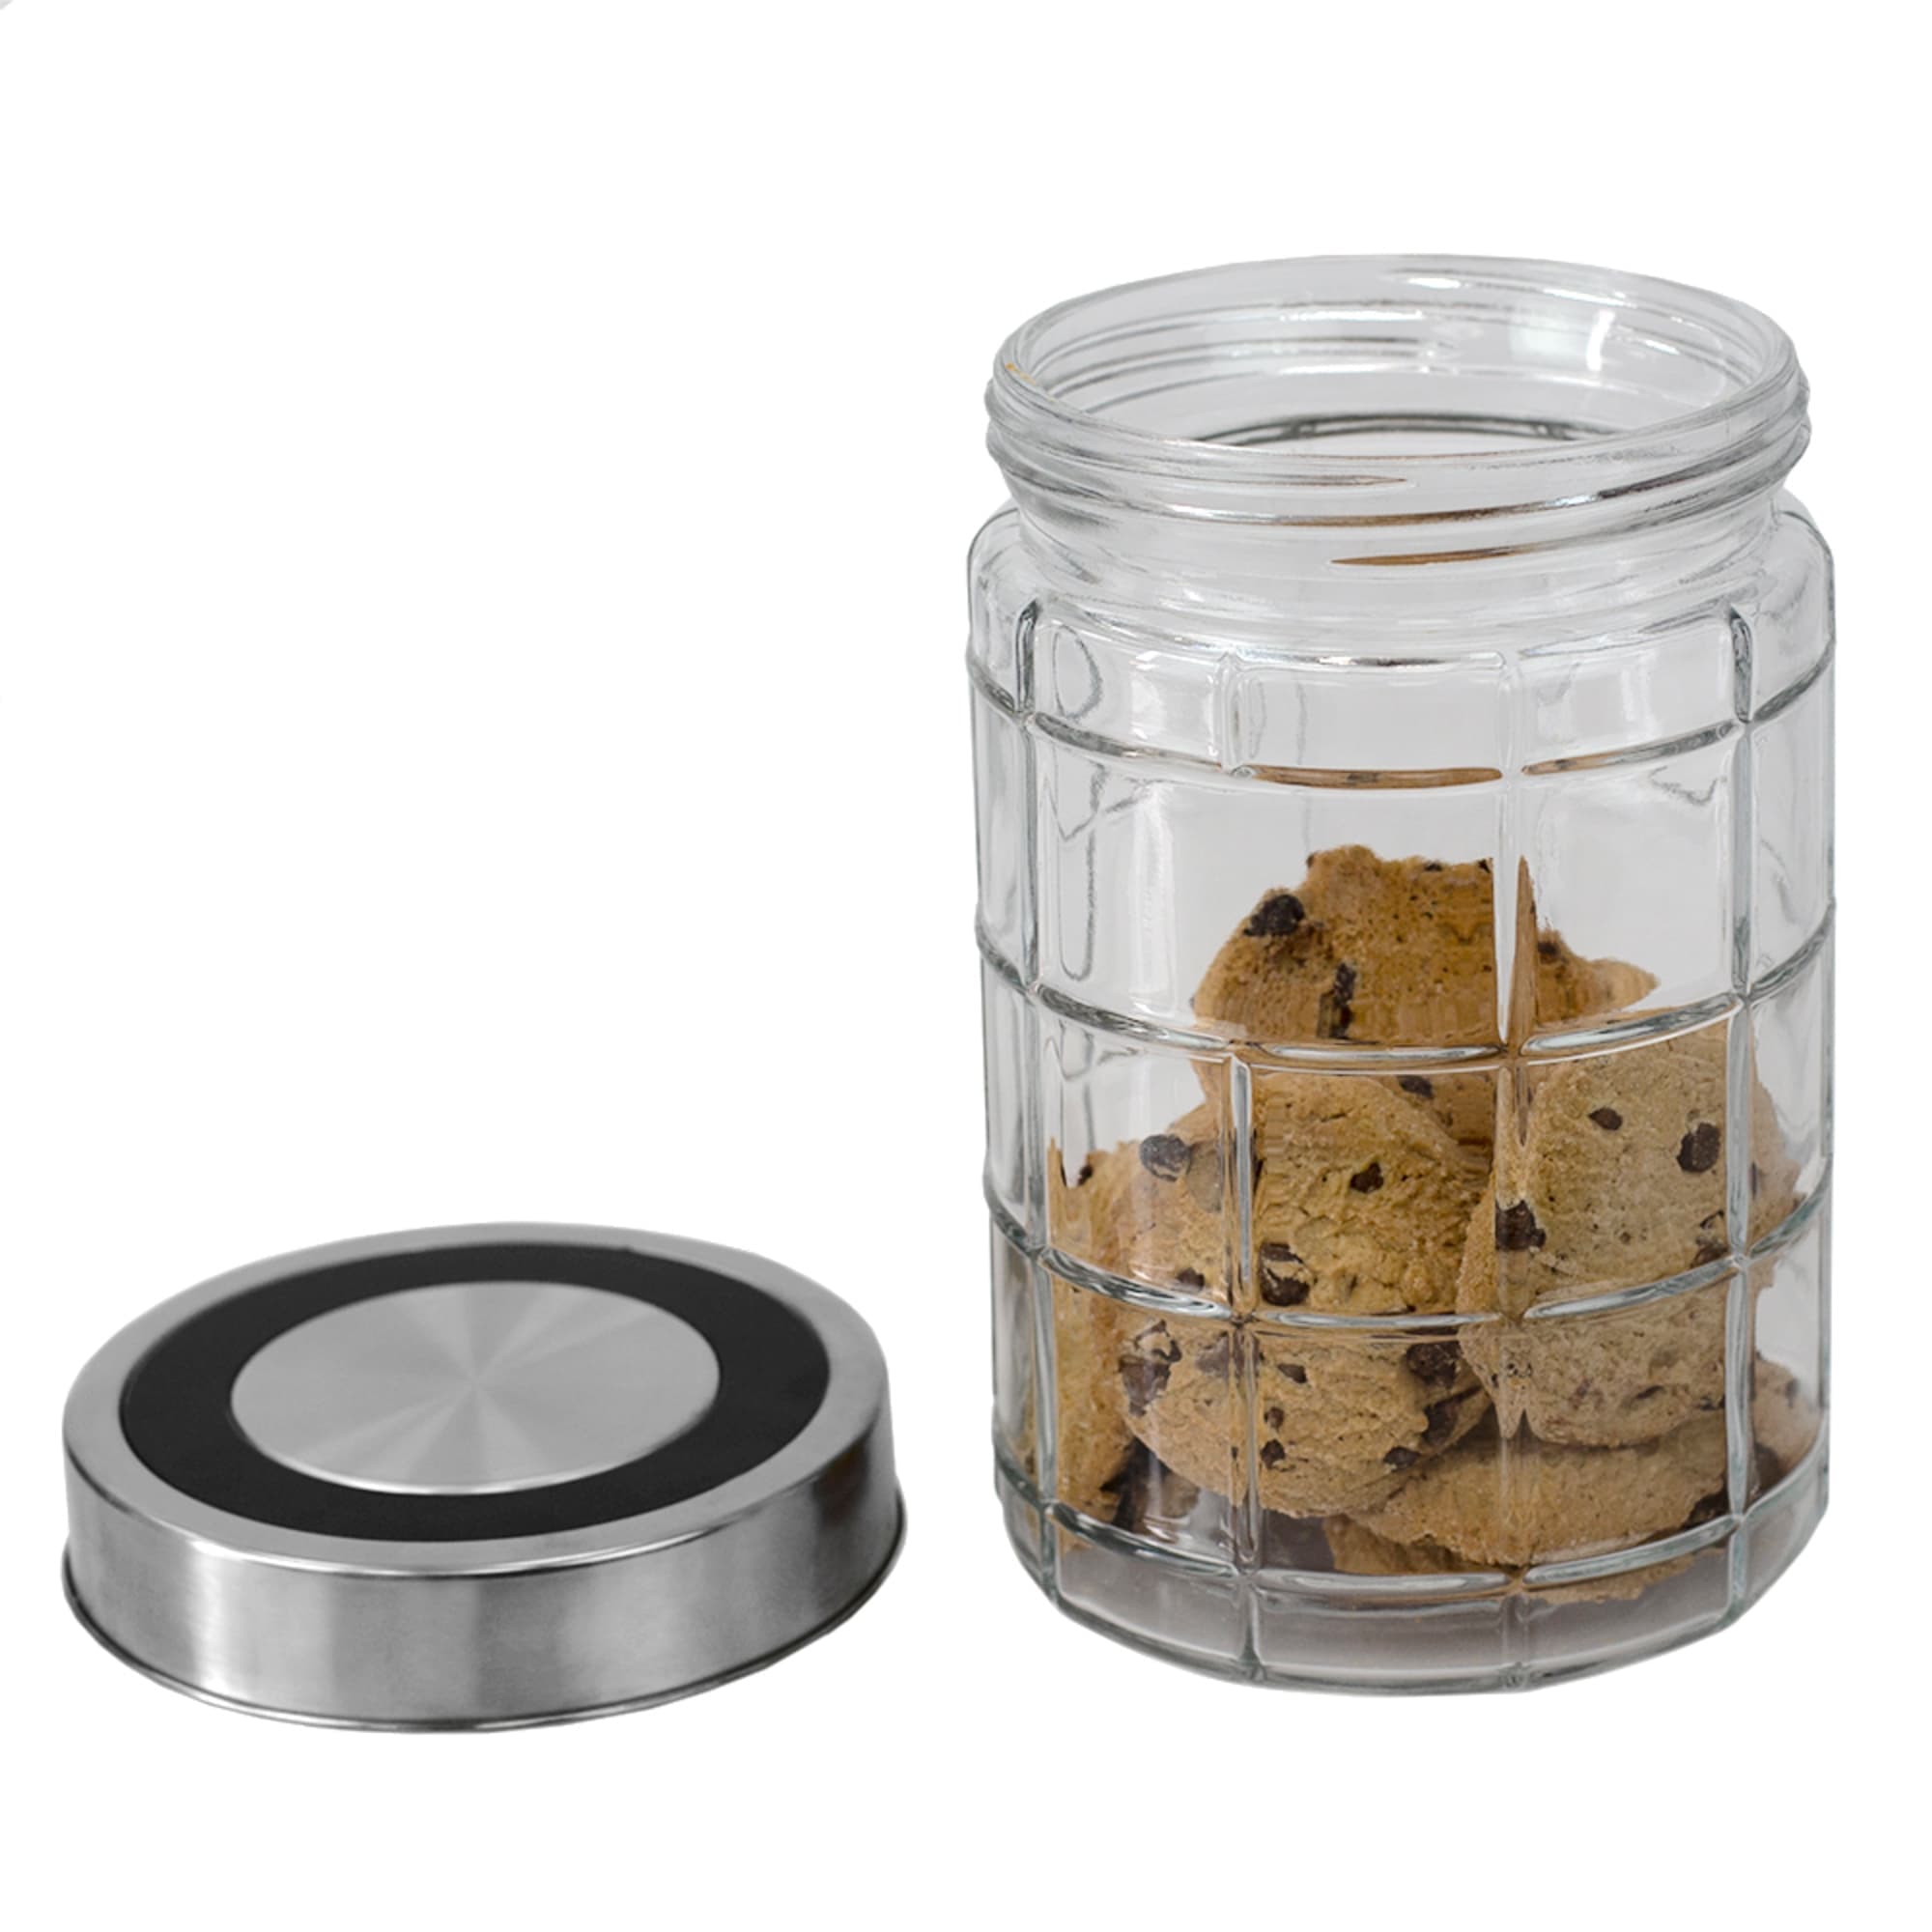 Home Basics Chex Collection 37 oz. Medium Glass Canister $2.50 EACH, CASE PACK OF 12